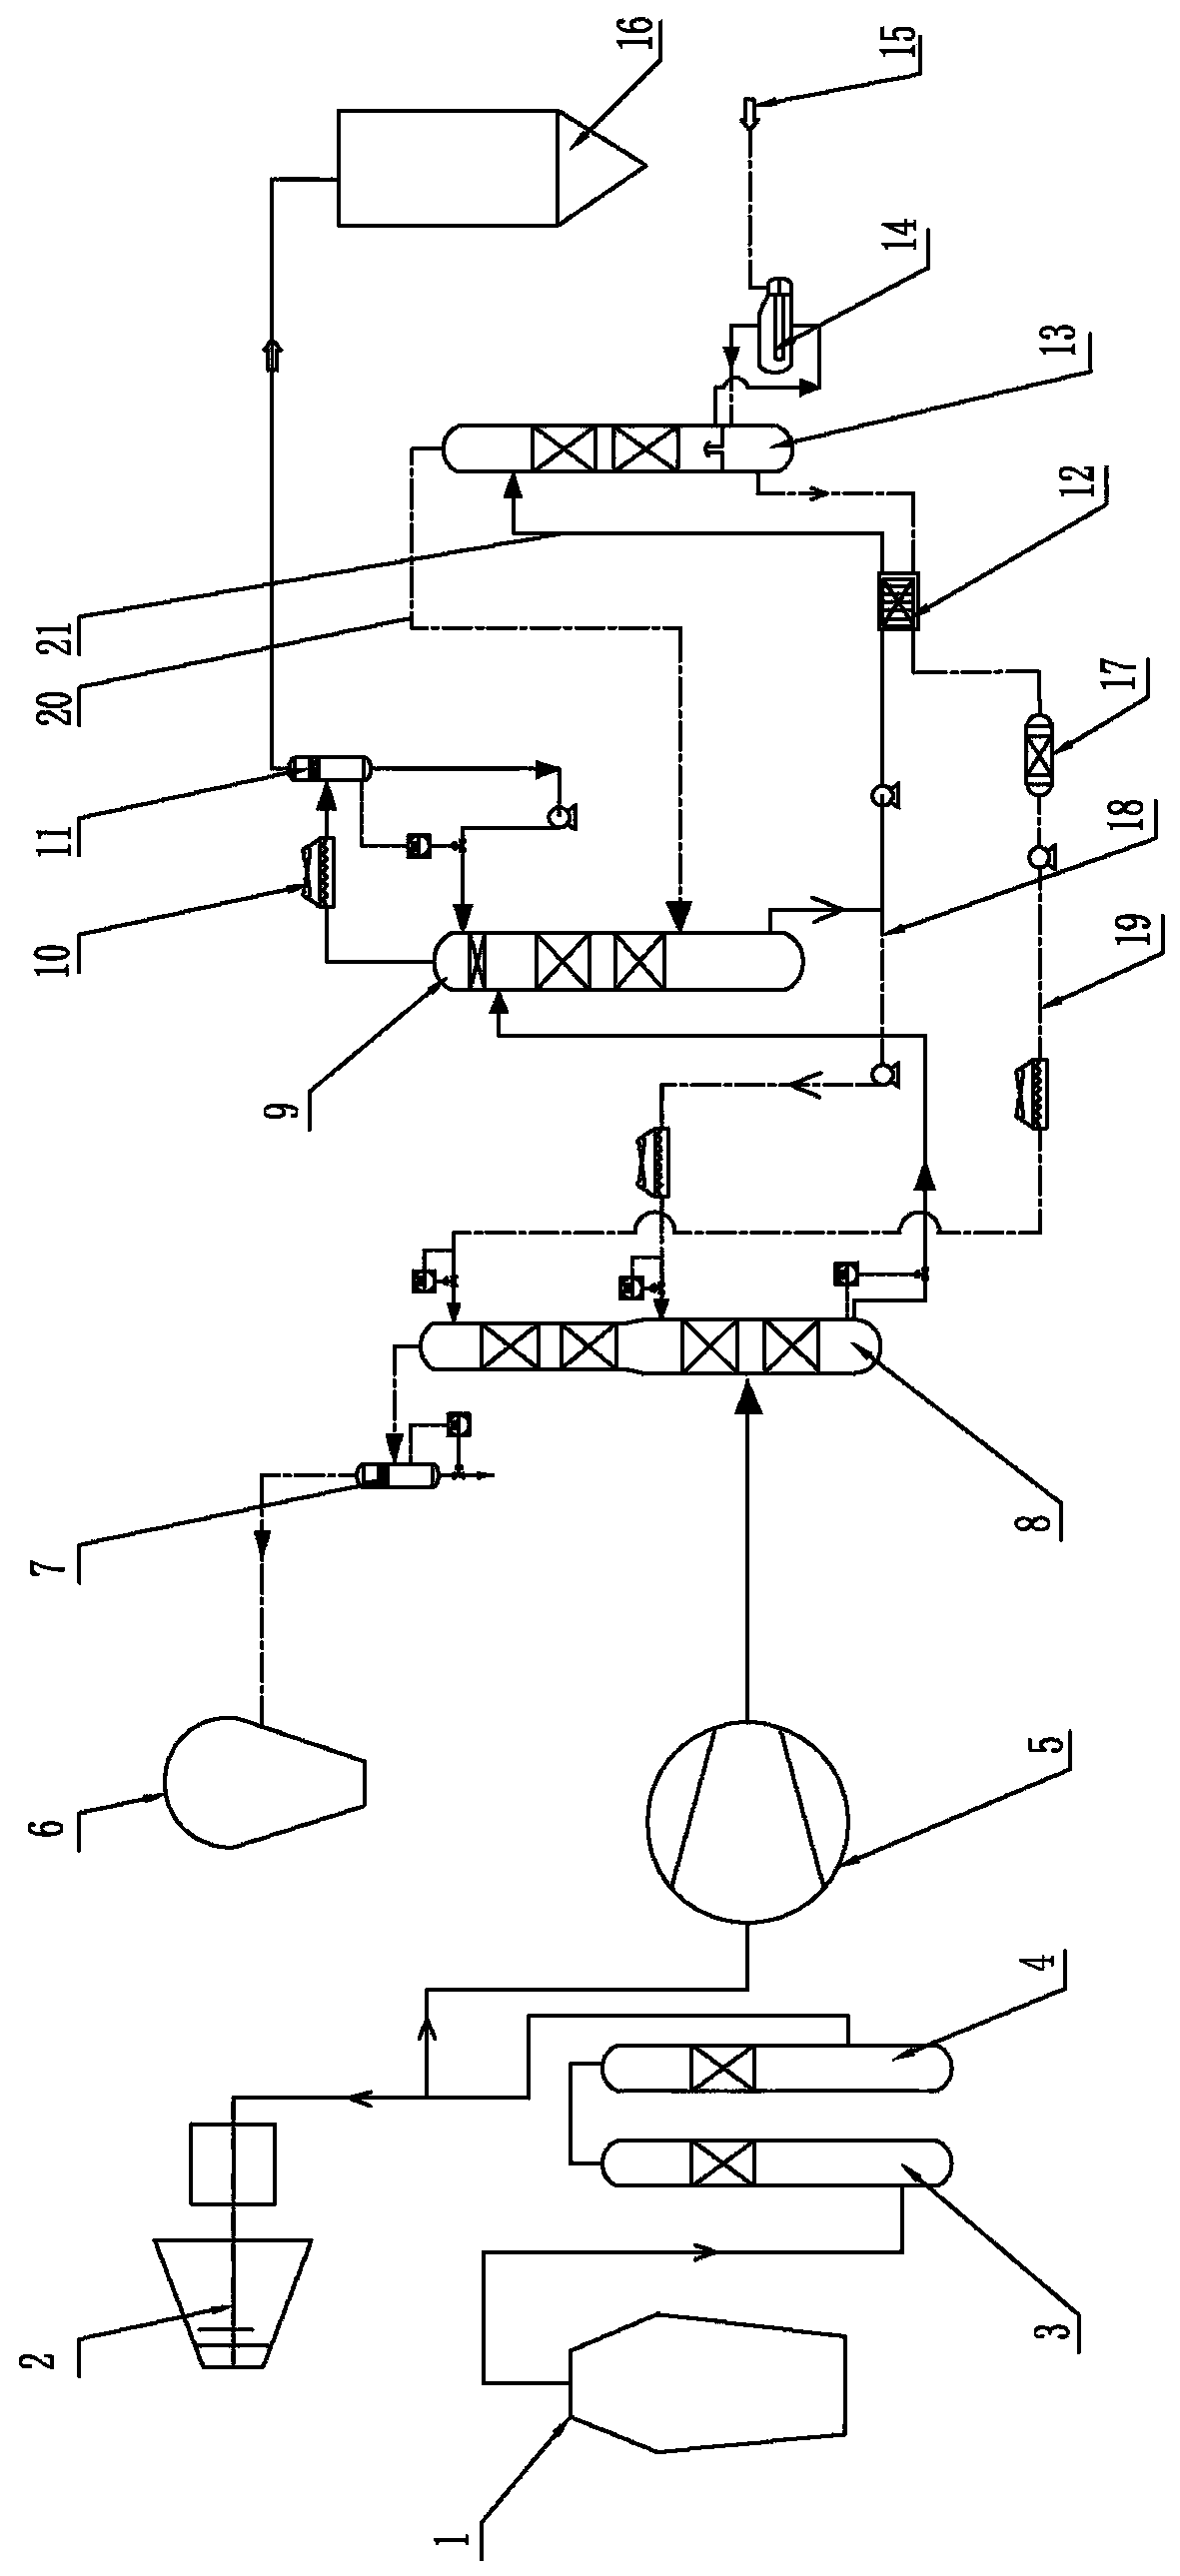 Device for removing CO2 from European smelting furnace gas